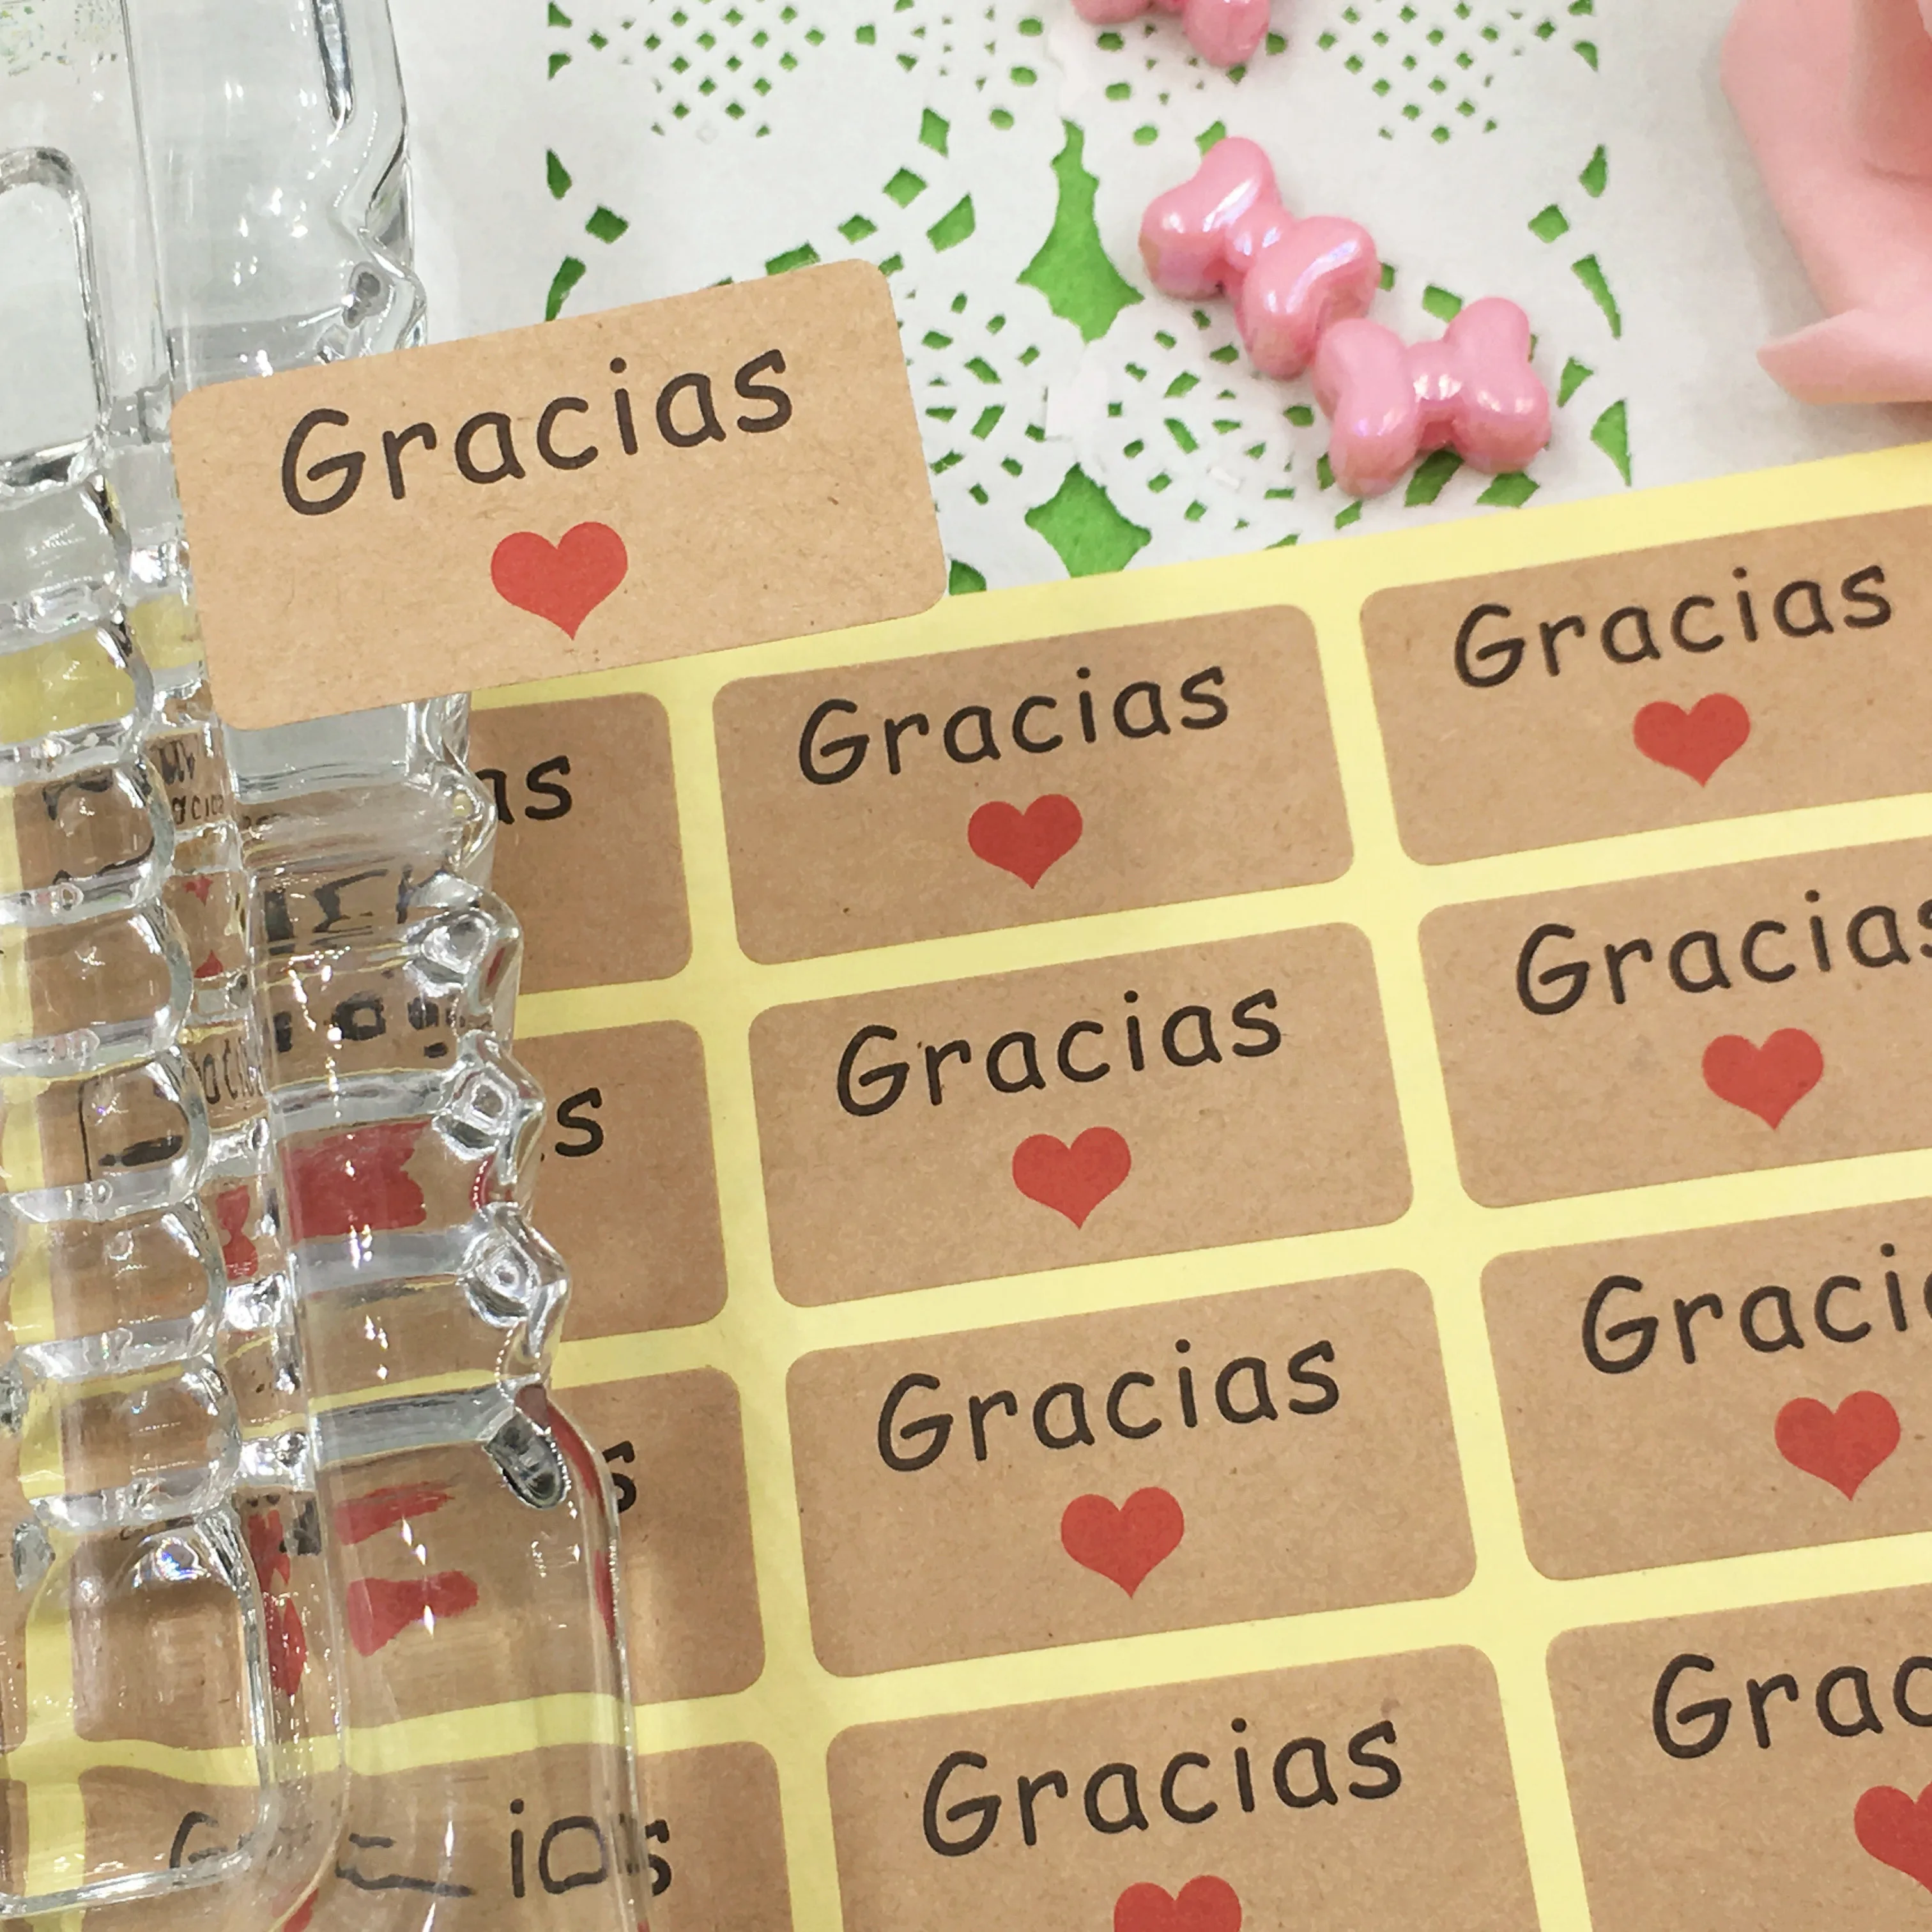 

600pcs Rectangle Shape Spanish Gracias Kraft Paper Stickers Handmade Gift Product Packaging Self Adhesive Stickers Labels